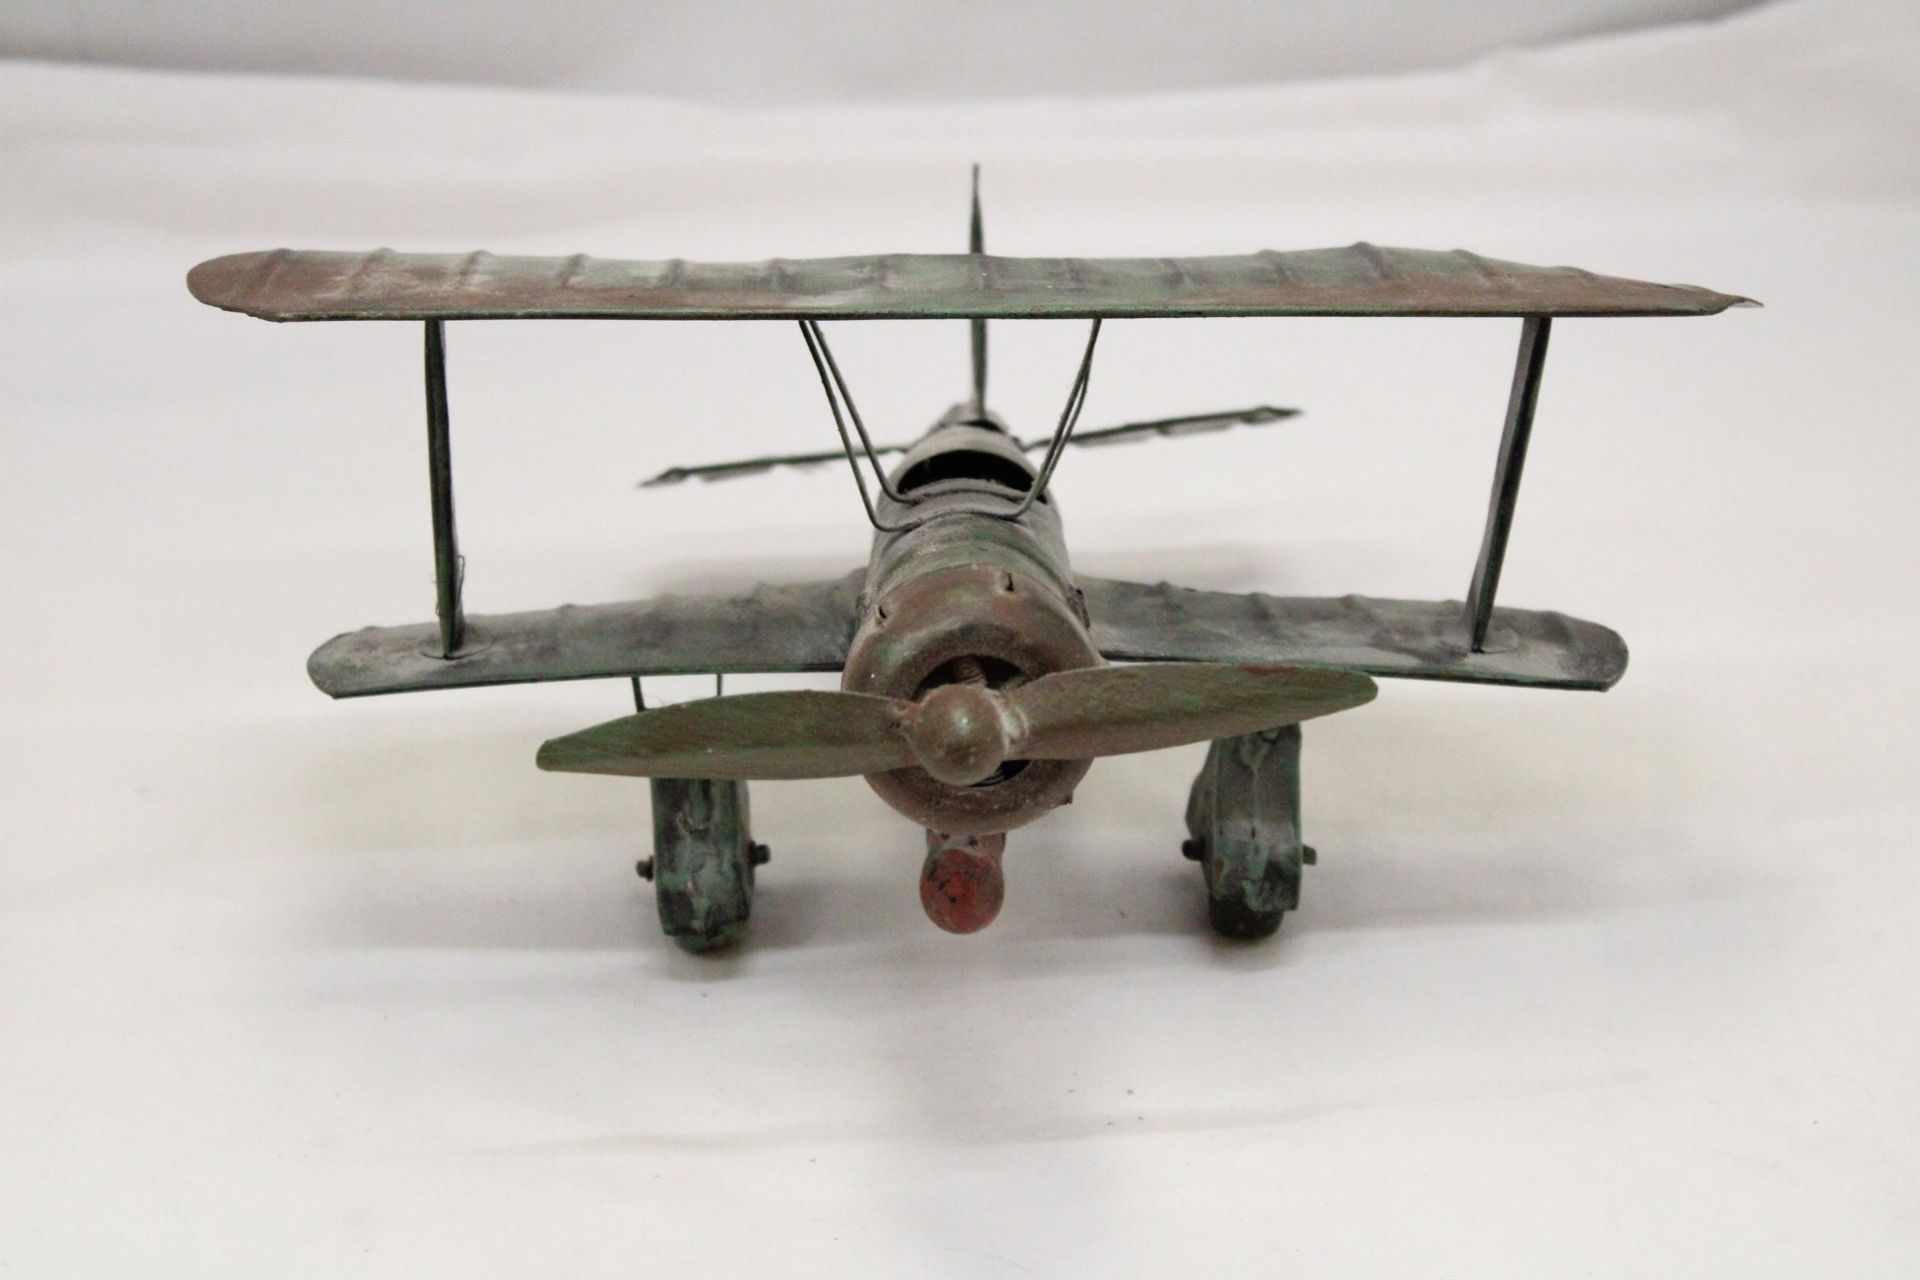 A U.S.A TIN PLATE BI-PLANE APPROXIMATELY 13CM HIGH BY 23CM LONG - Image 5 of 5